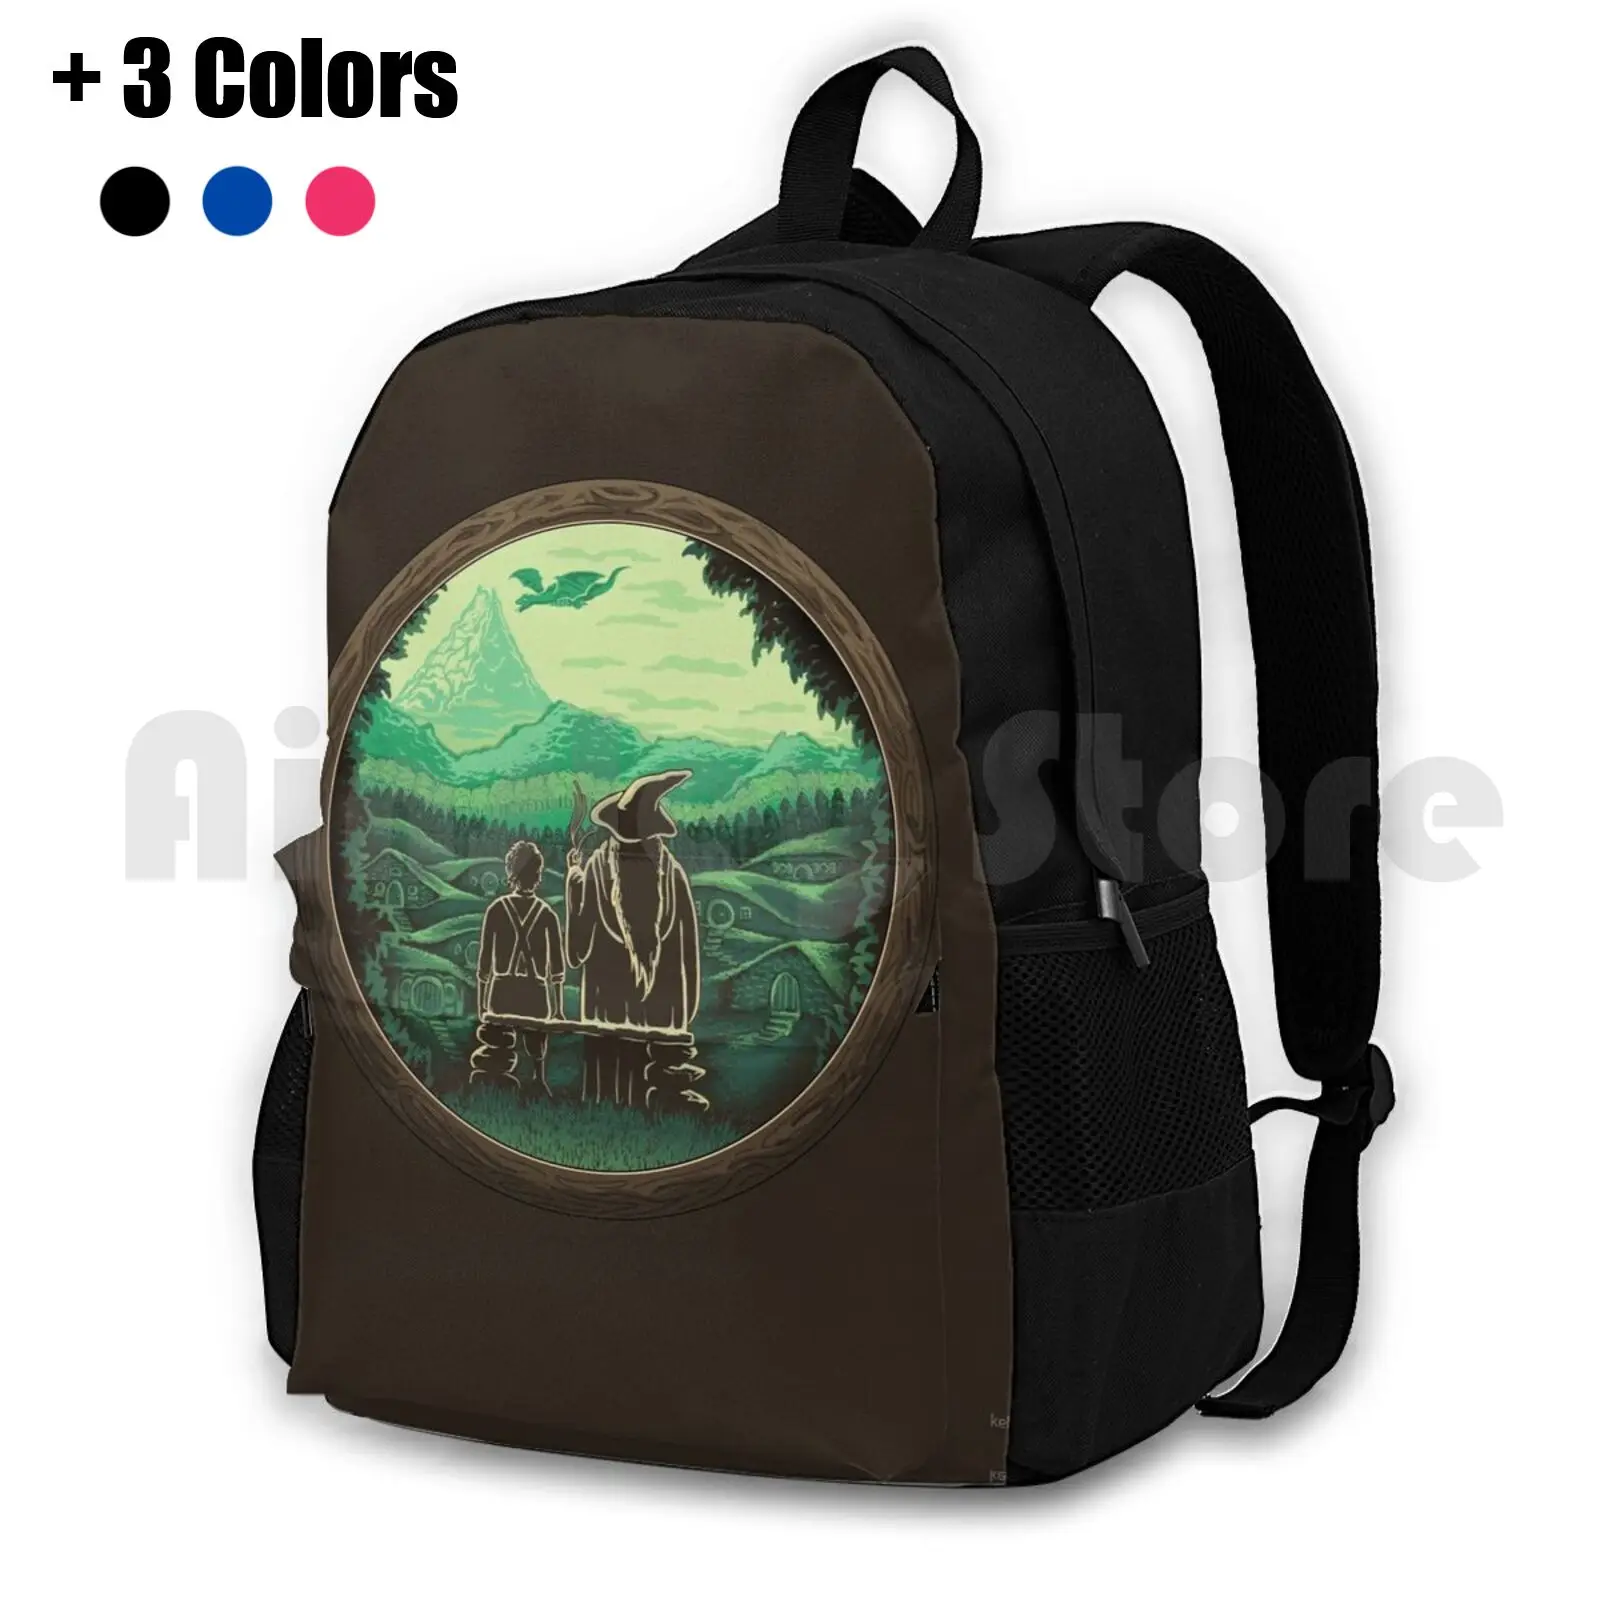 

Let'S Have An Adventure Outdoor Hiking Backpack Waterproof Camping Travel Wizard Nature Pop Culture Movie Movies Tv Dragon Book